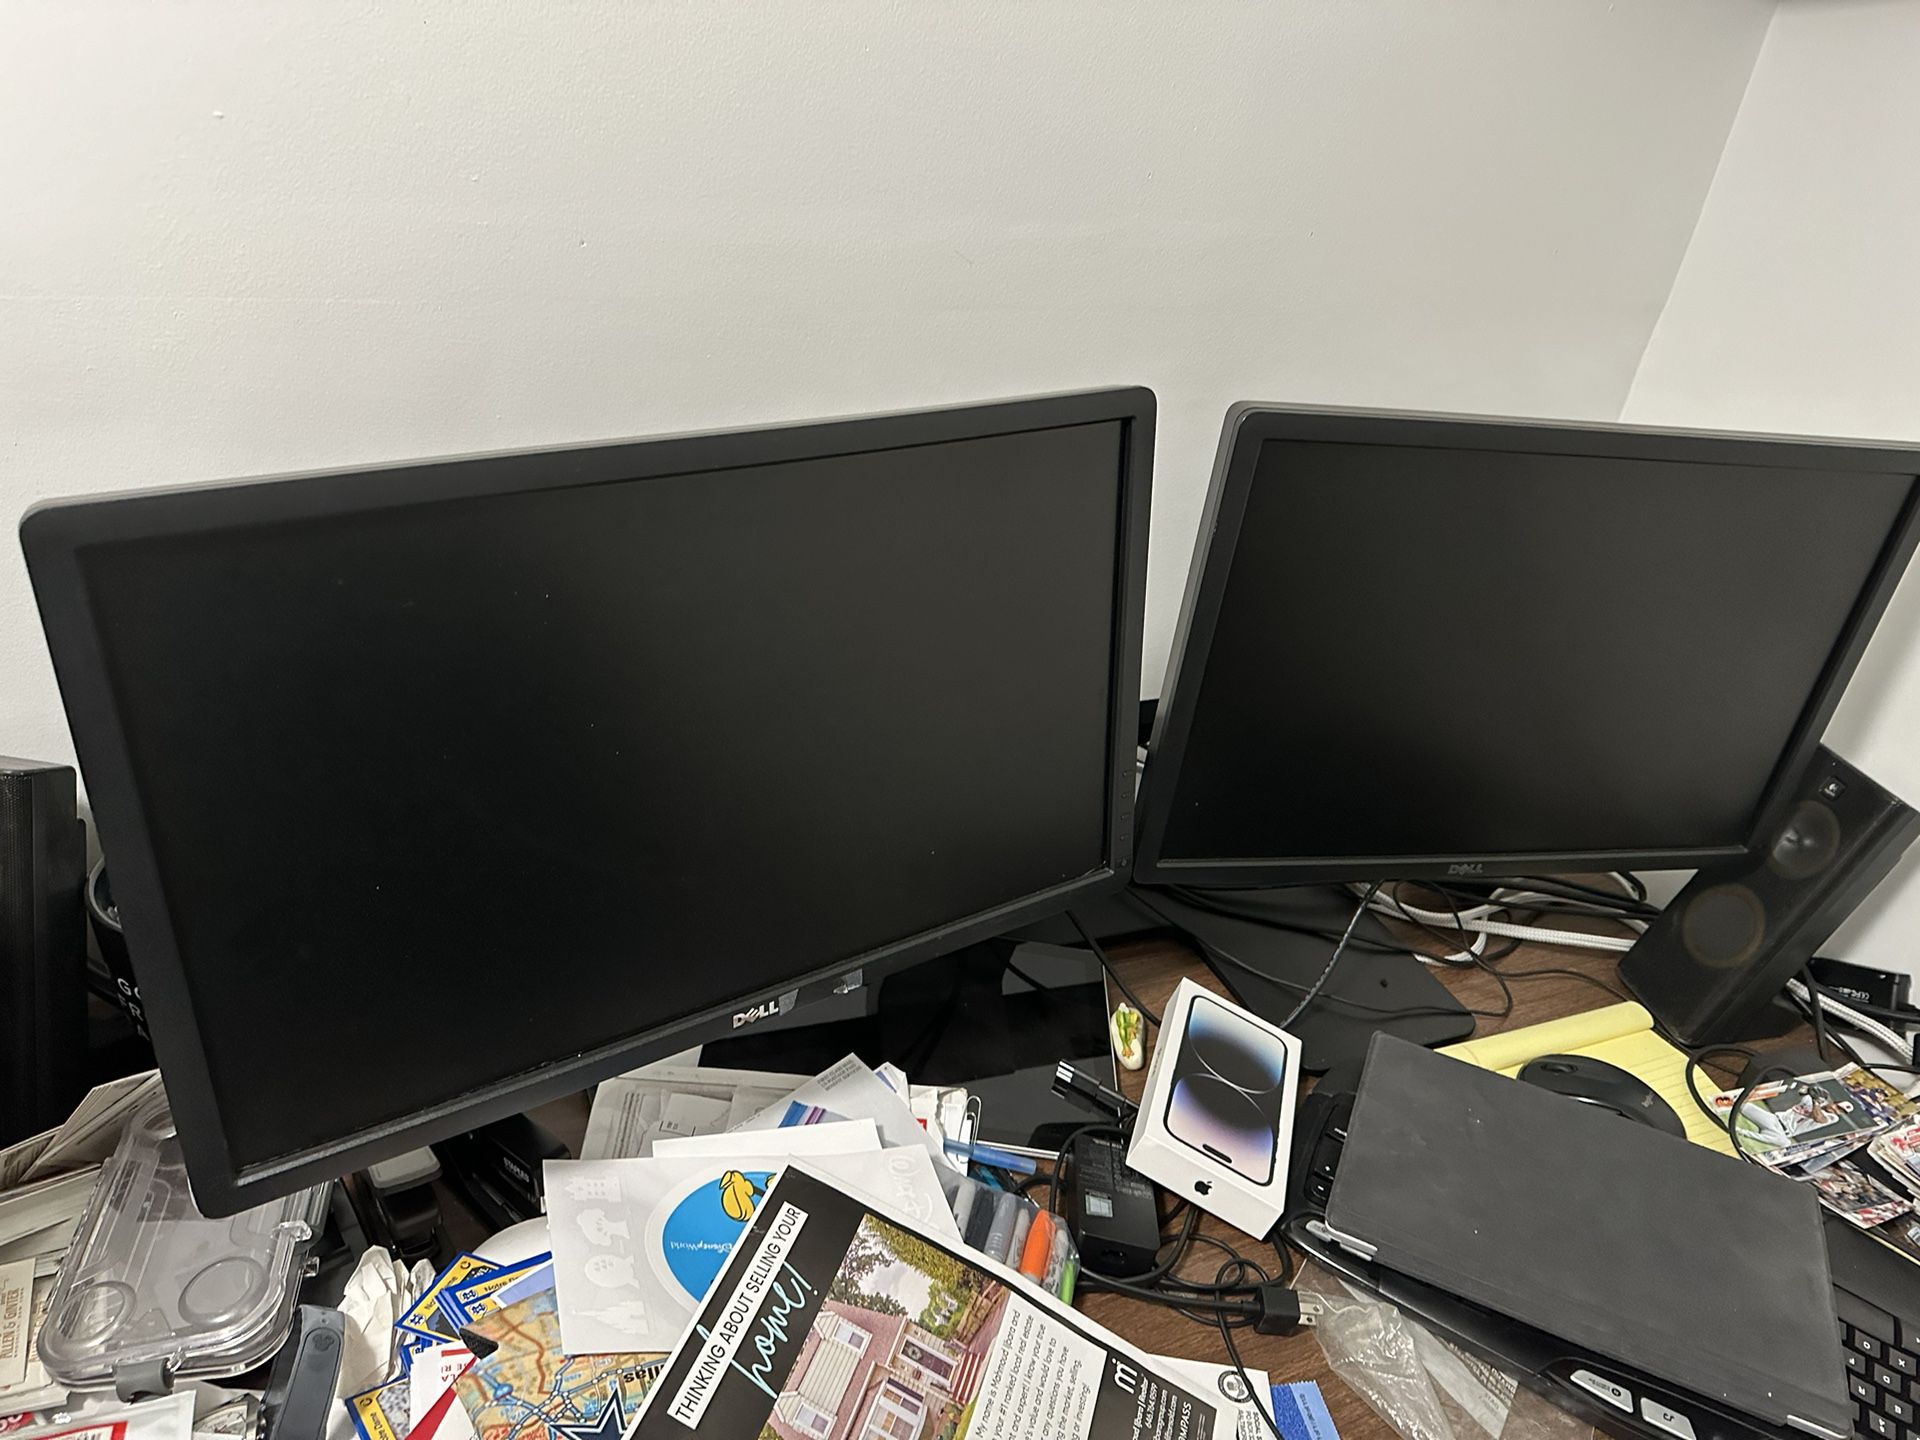 Dell Dual Monitor Stand With 22” Monitors